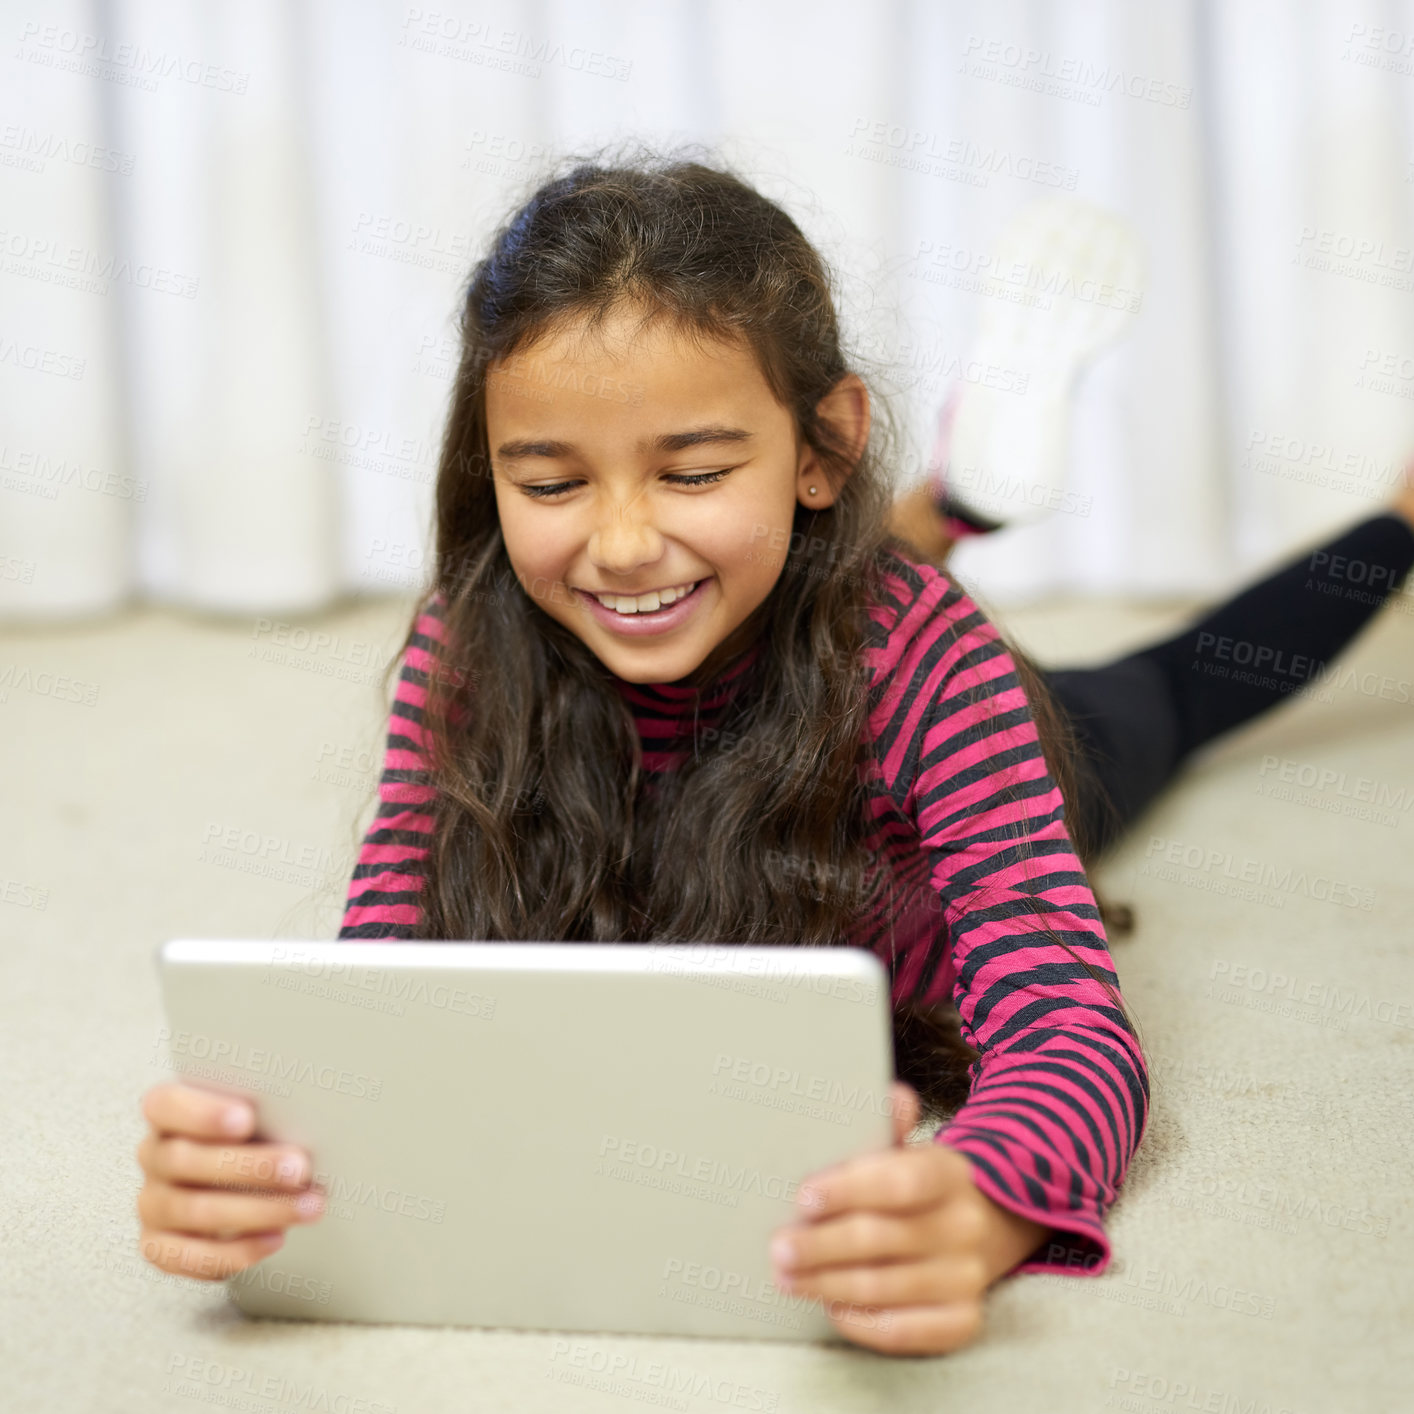 Buy stock photo Shot of a cute little girl using her tablet while lying on the floor at home